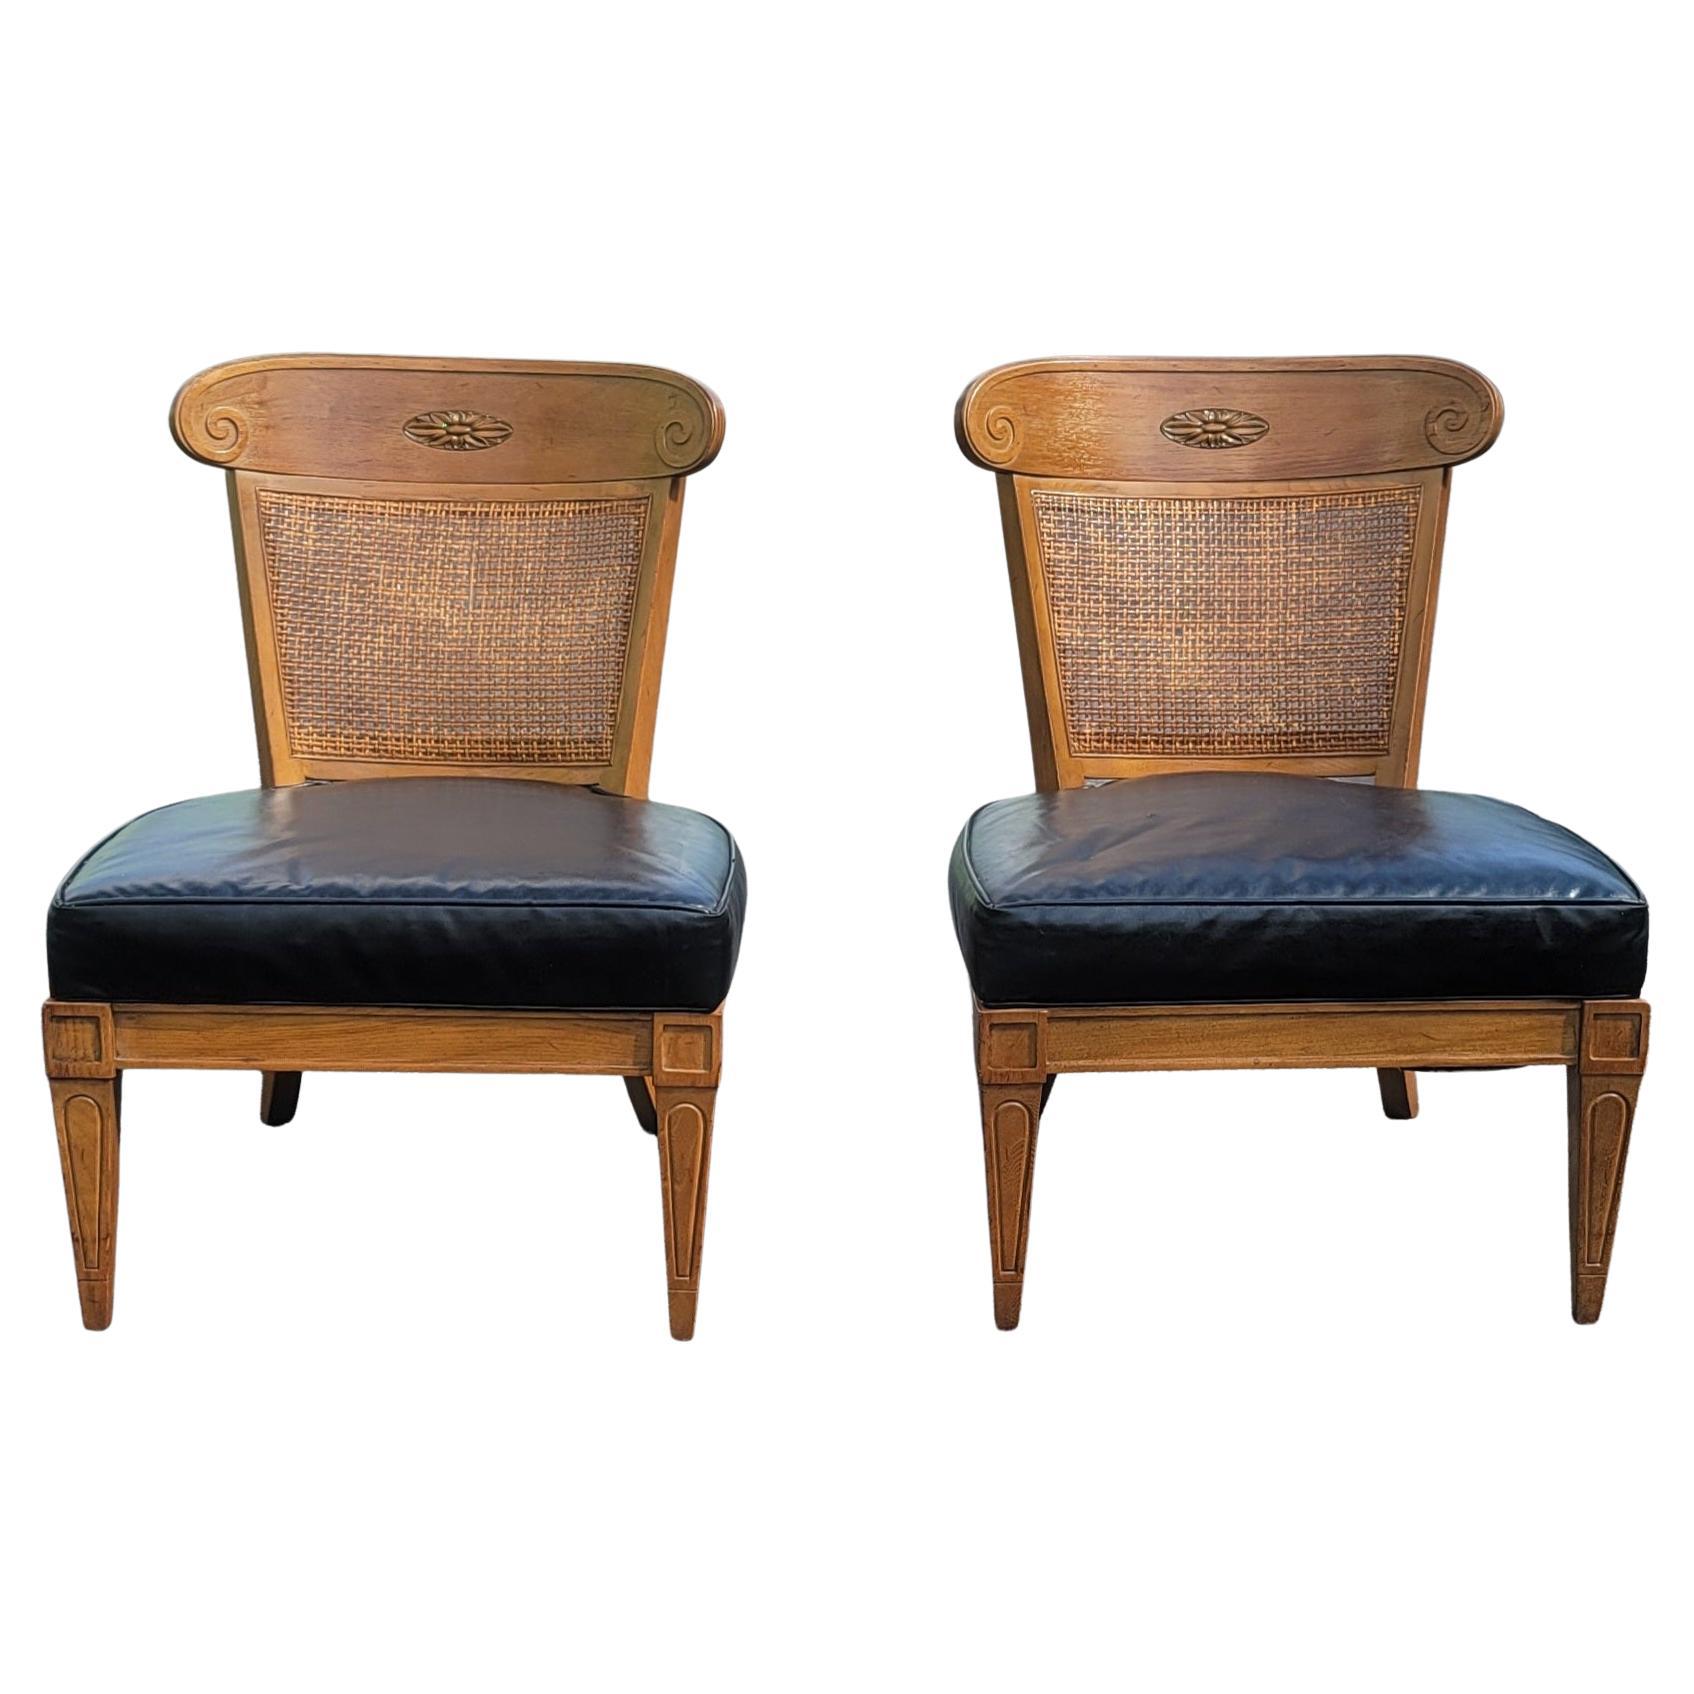 1950s American of Martinsville Walnut Cane Slipper Lounge Chairs, a Pair For Sale